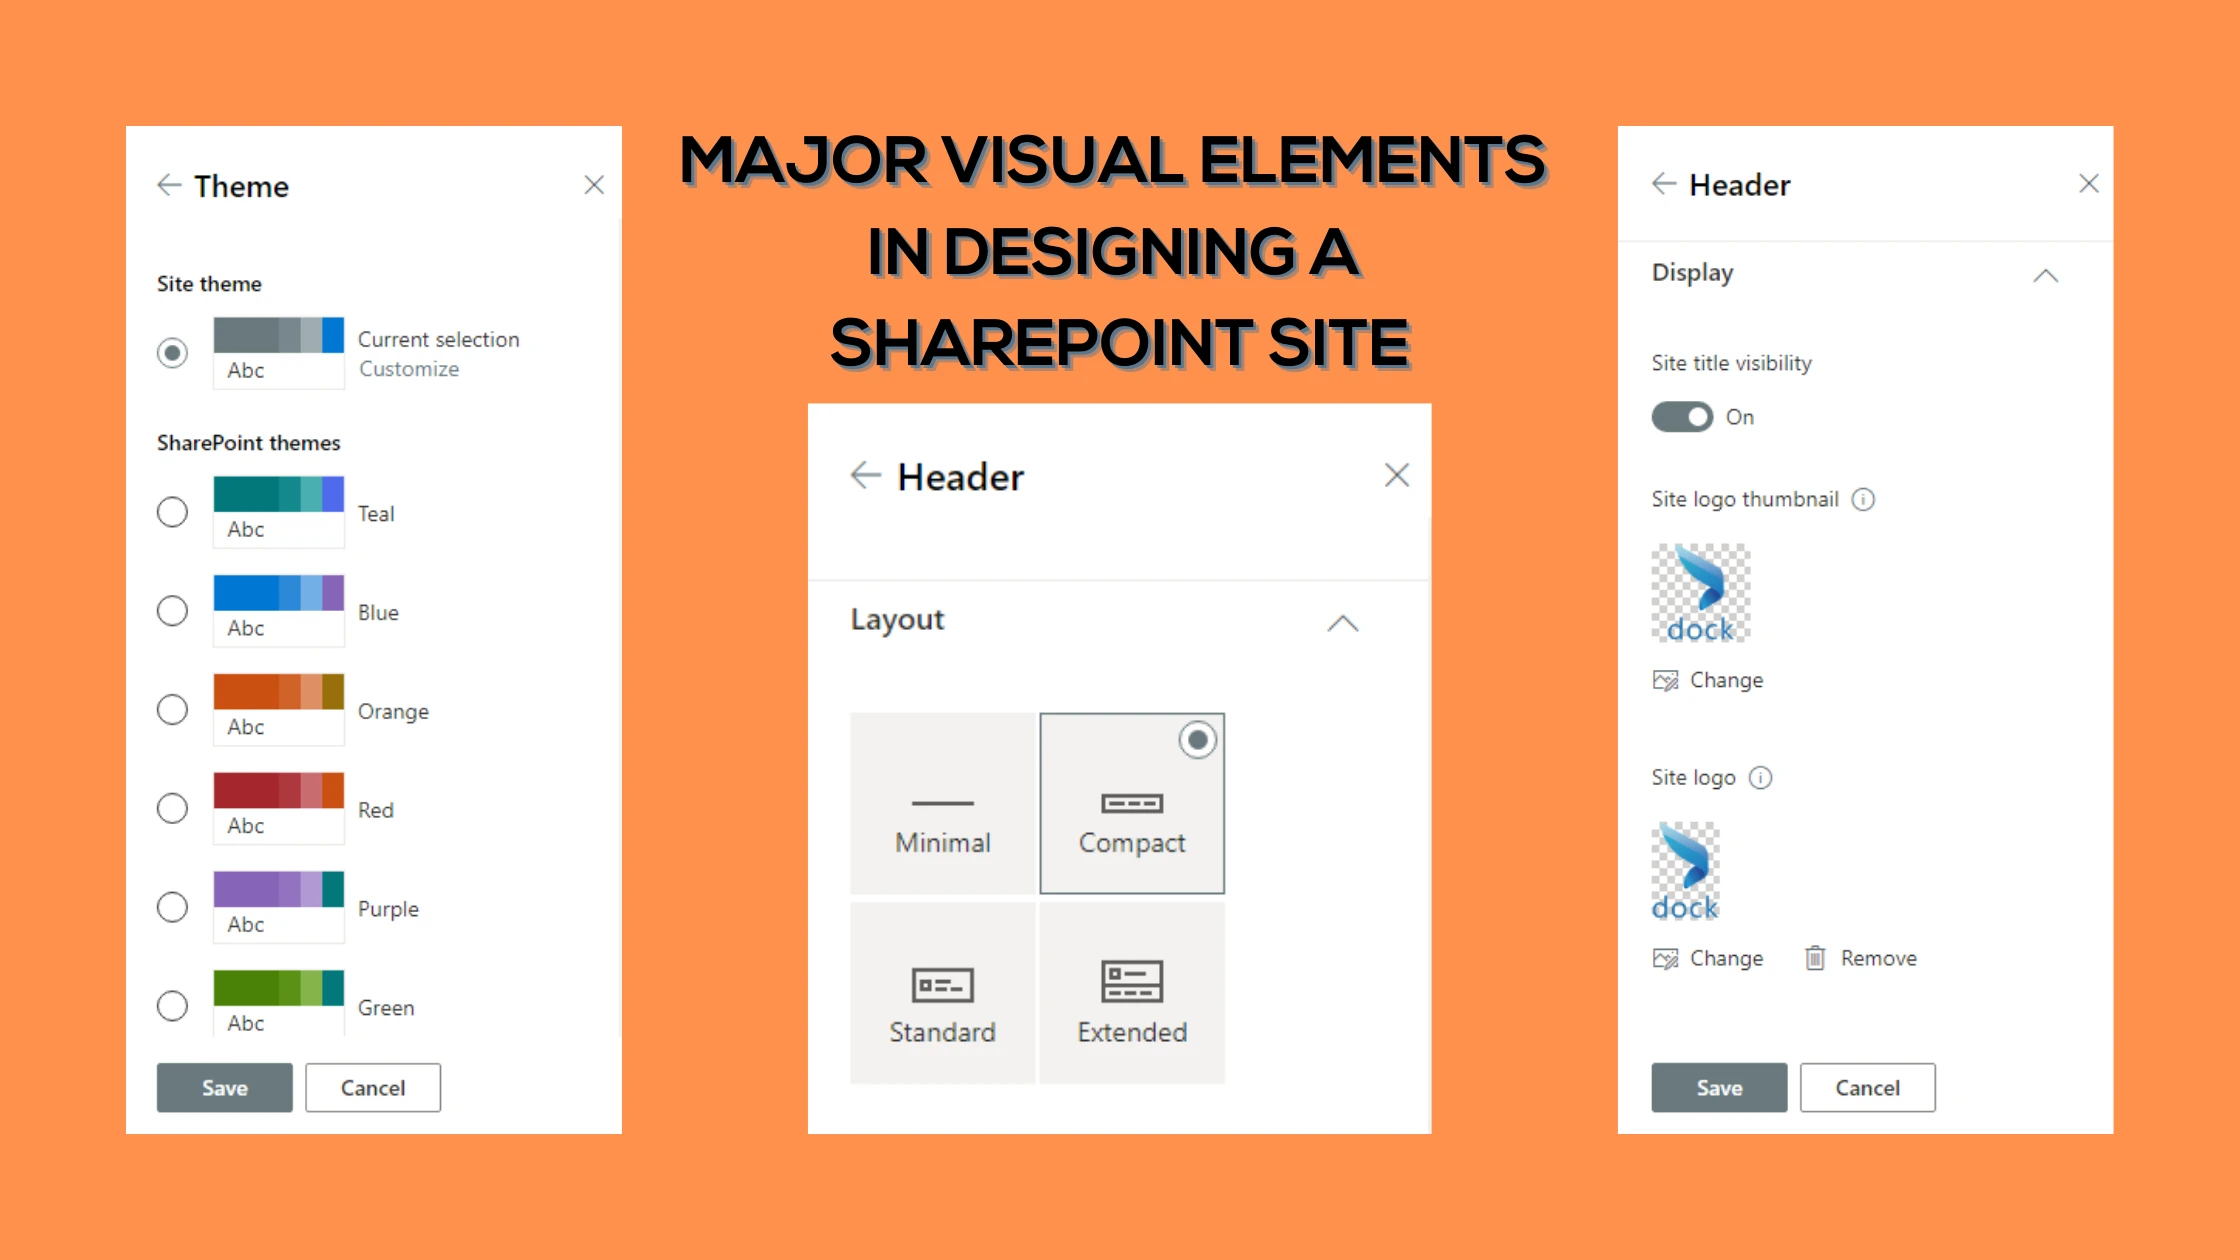 Major Visual Elements in Designing a SharePoint Site